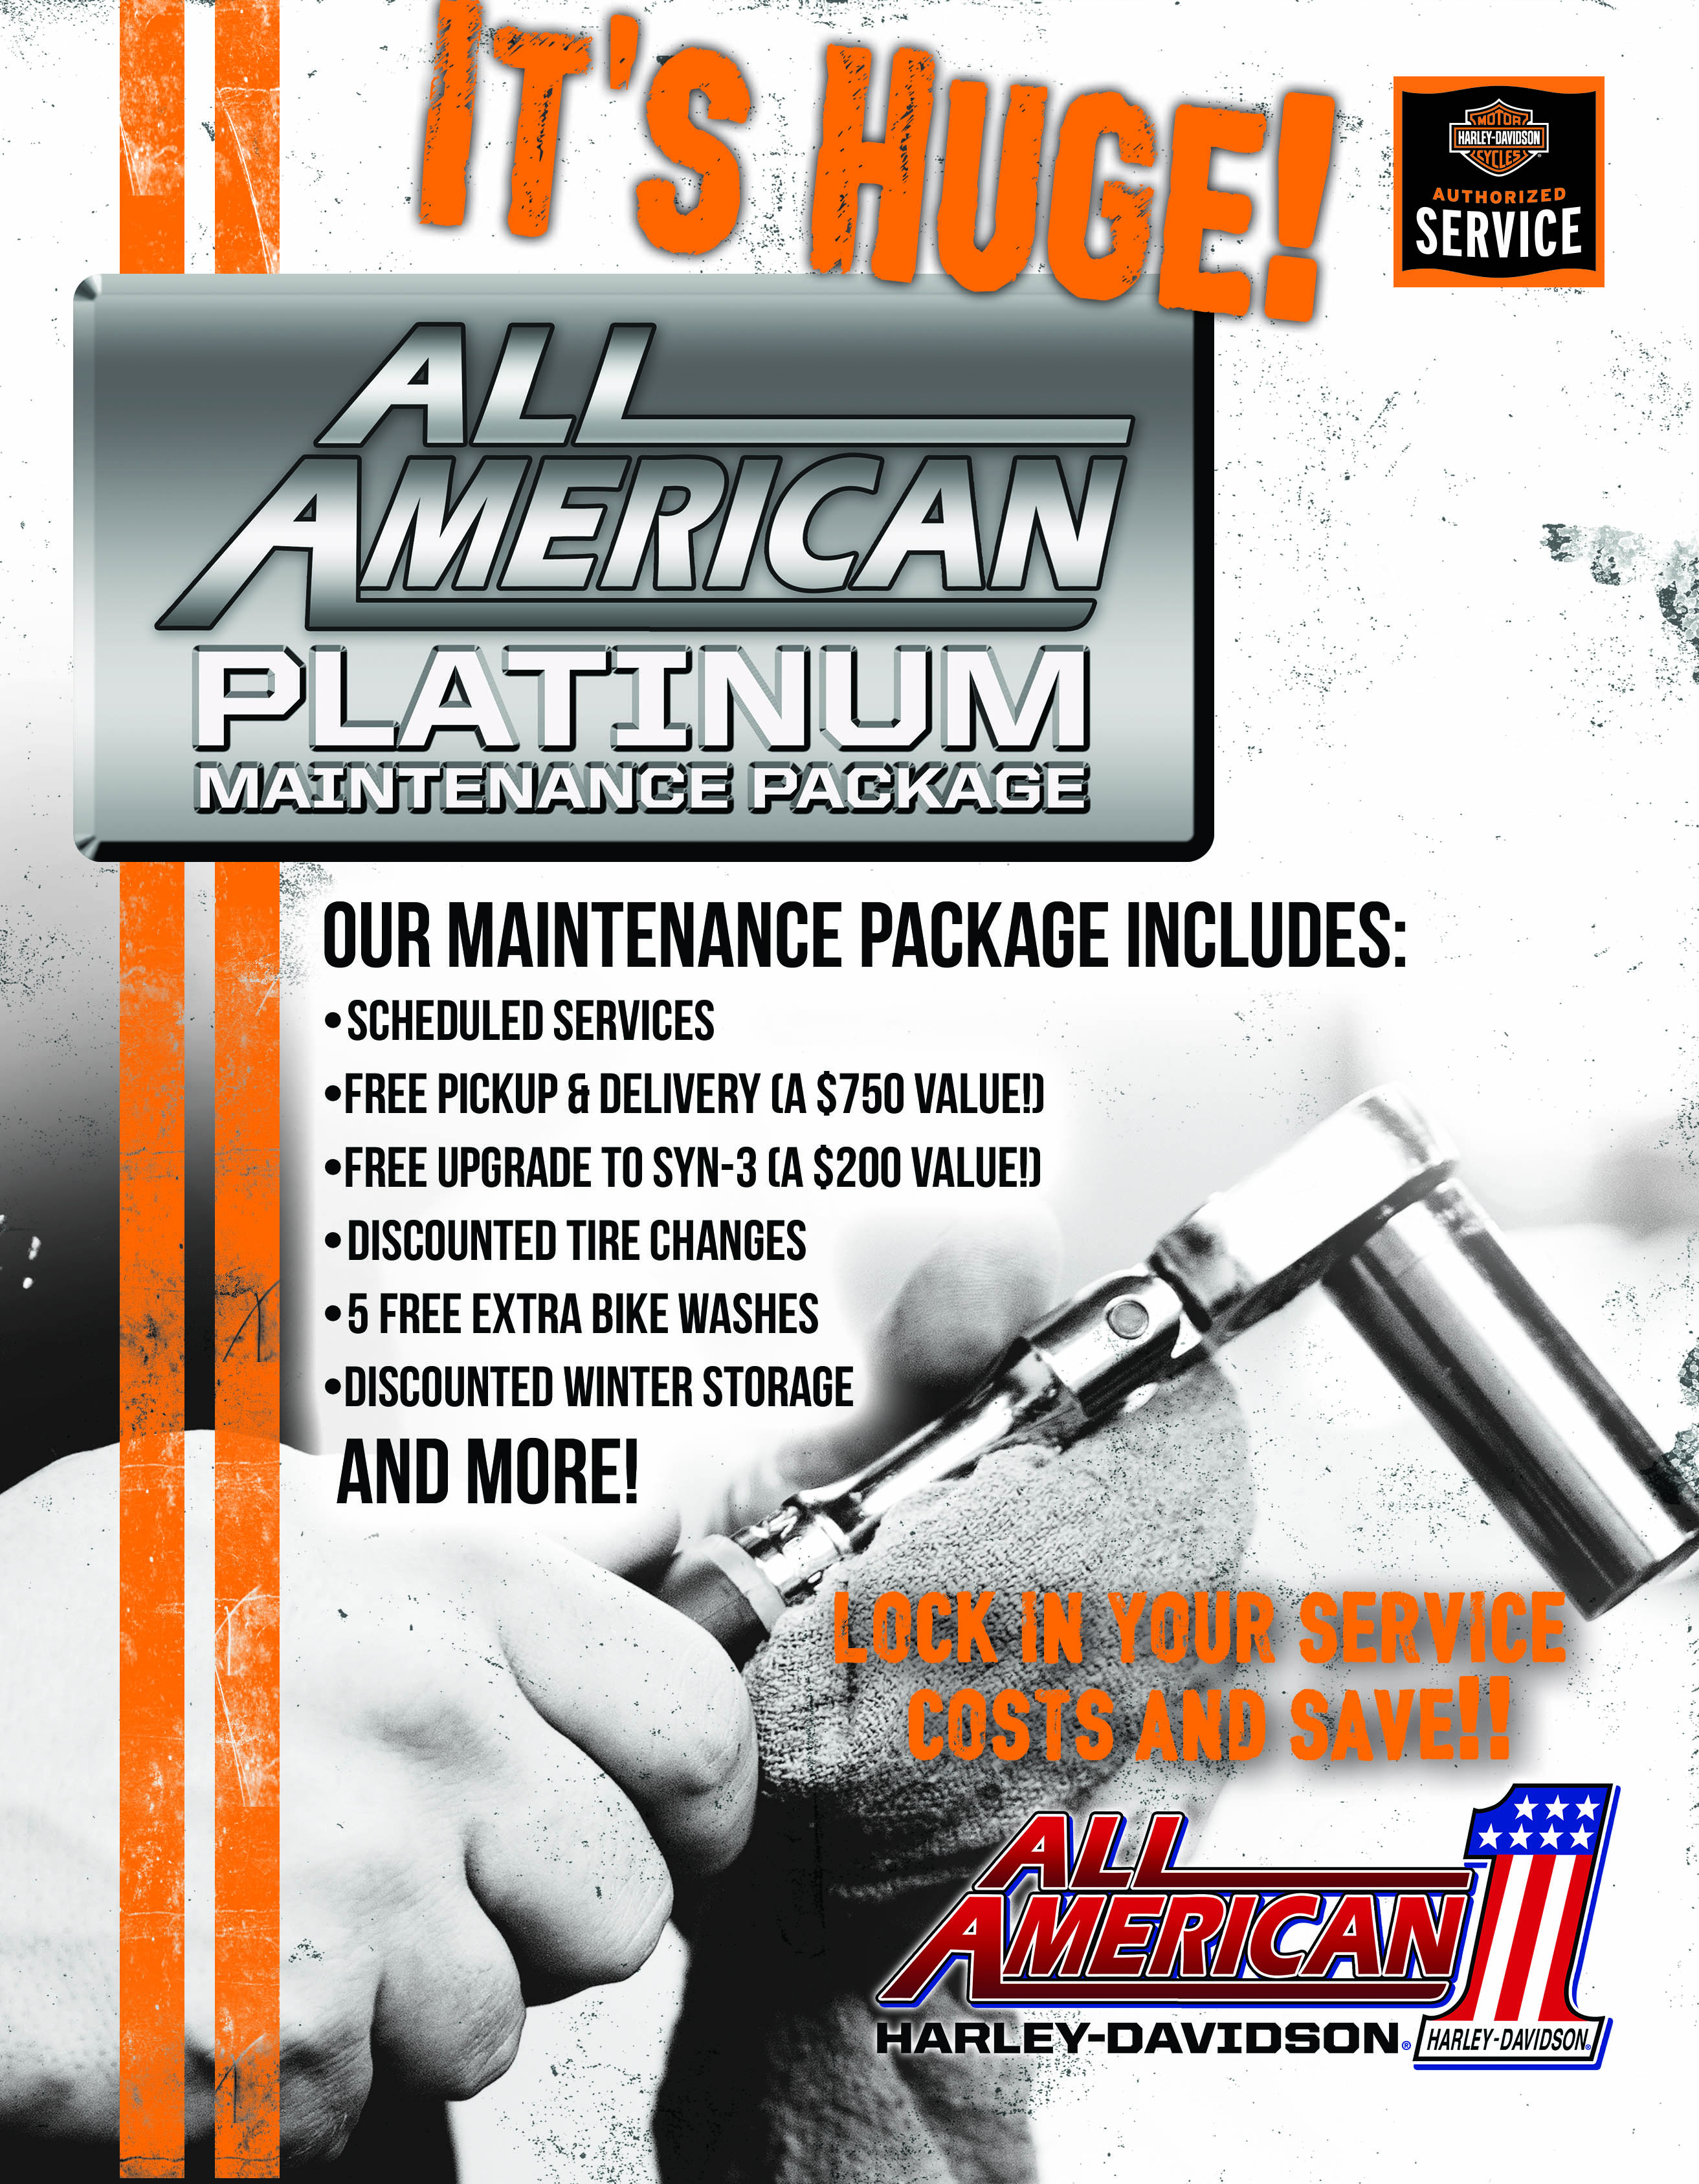 Service your Harley-Davidson to keep it safe and maintain its value!